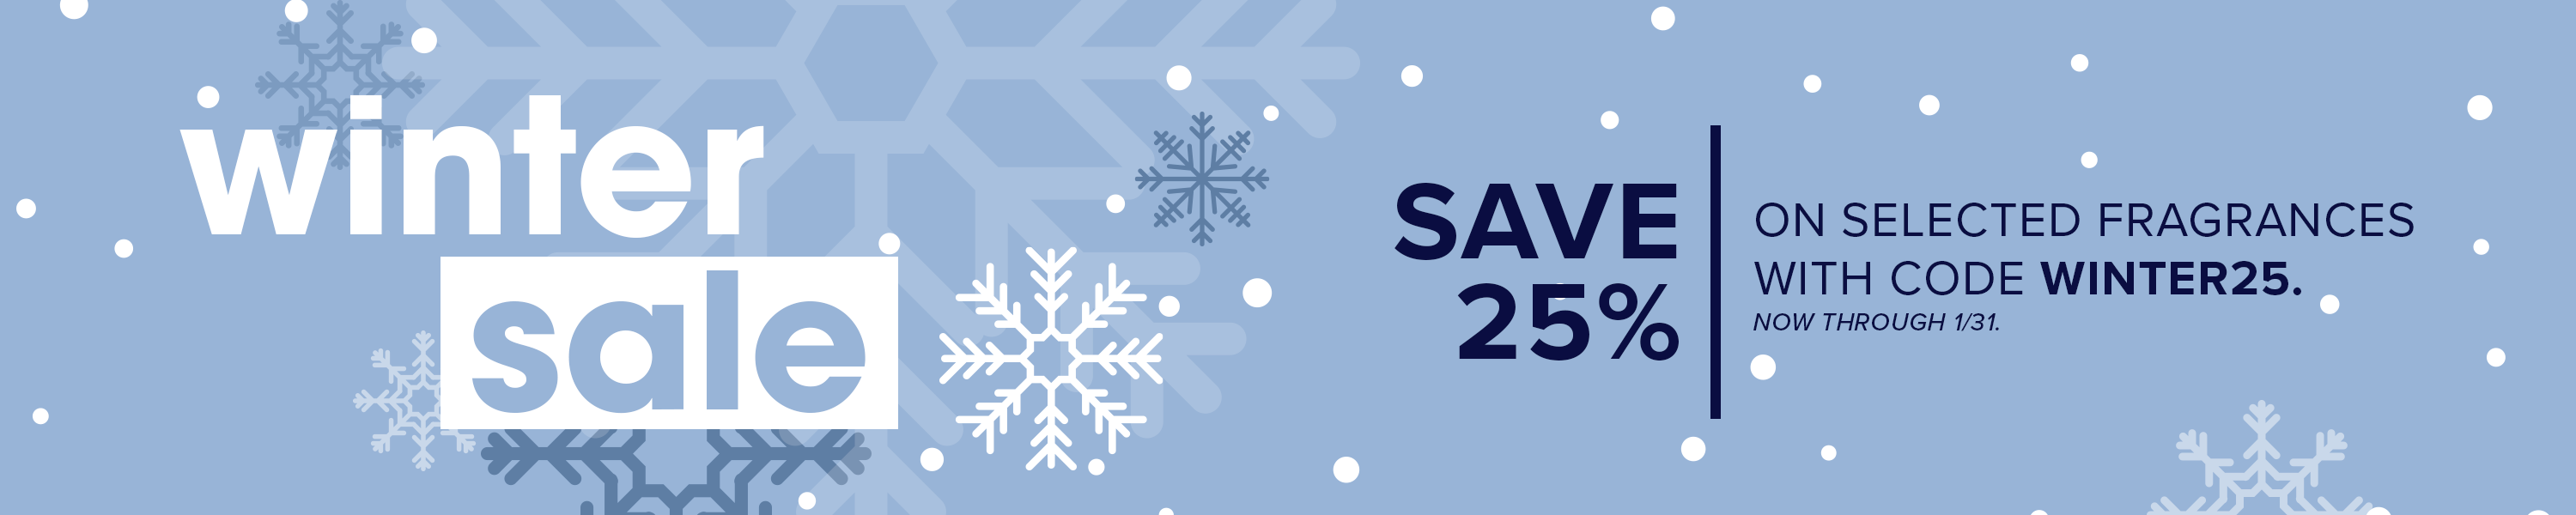 Save 40-75% During Our Winter Clearance Sale